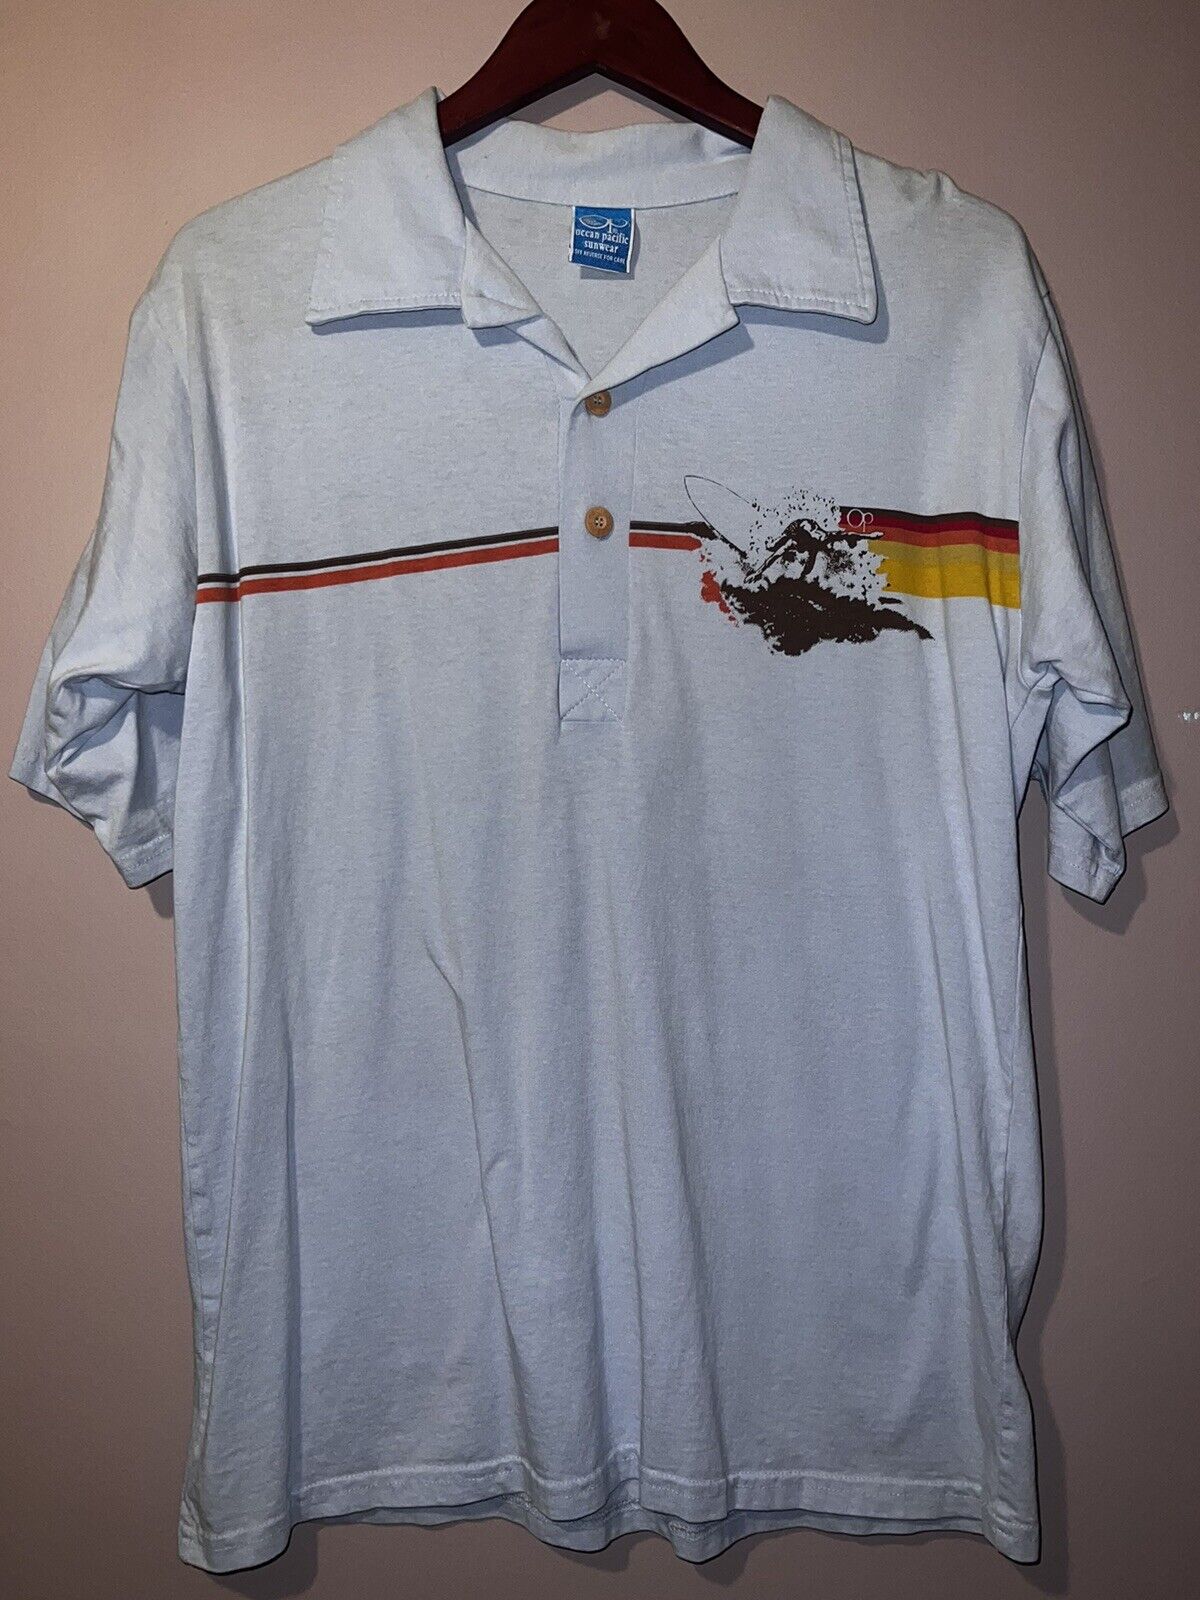 VINTAGE OP OCEAN PACIFIC SURFING POLO SHIRT medium made in USA